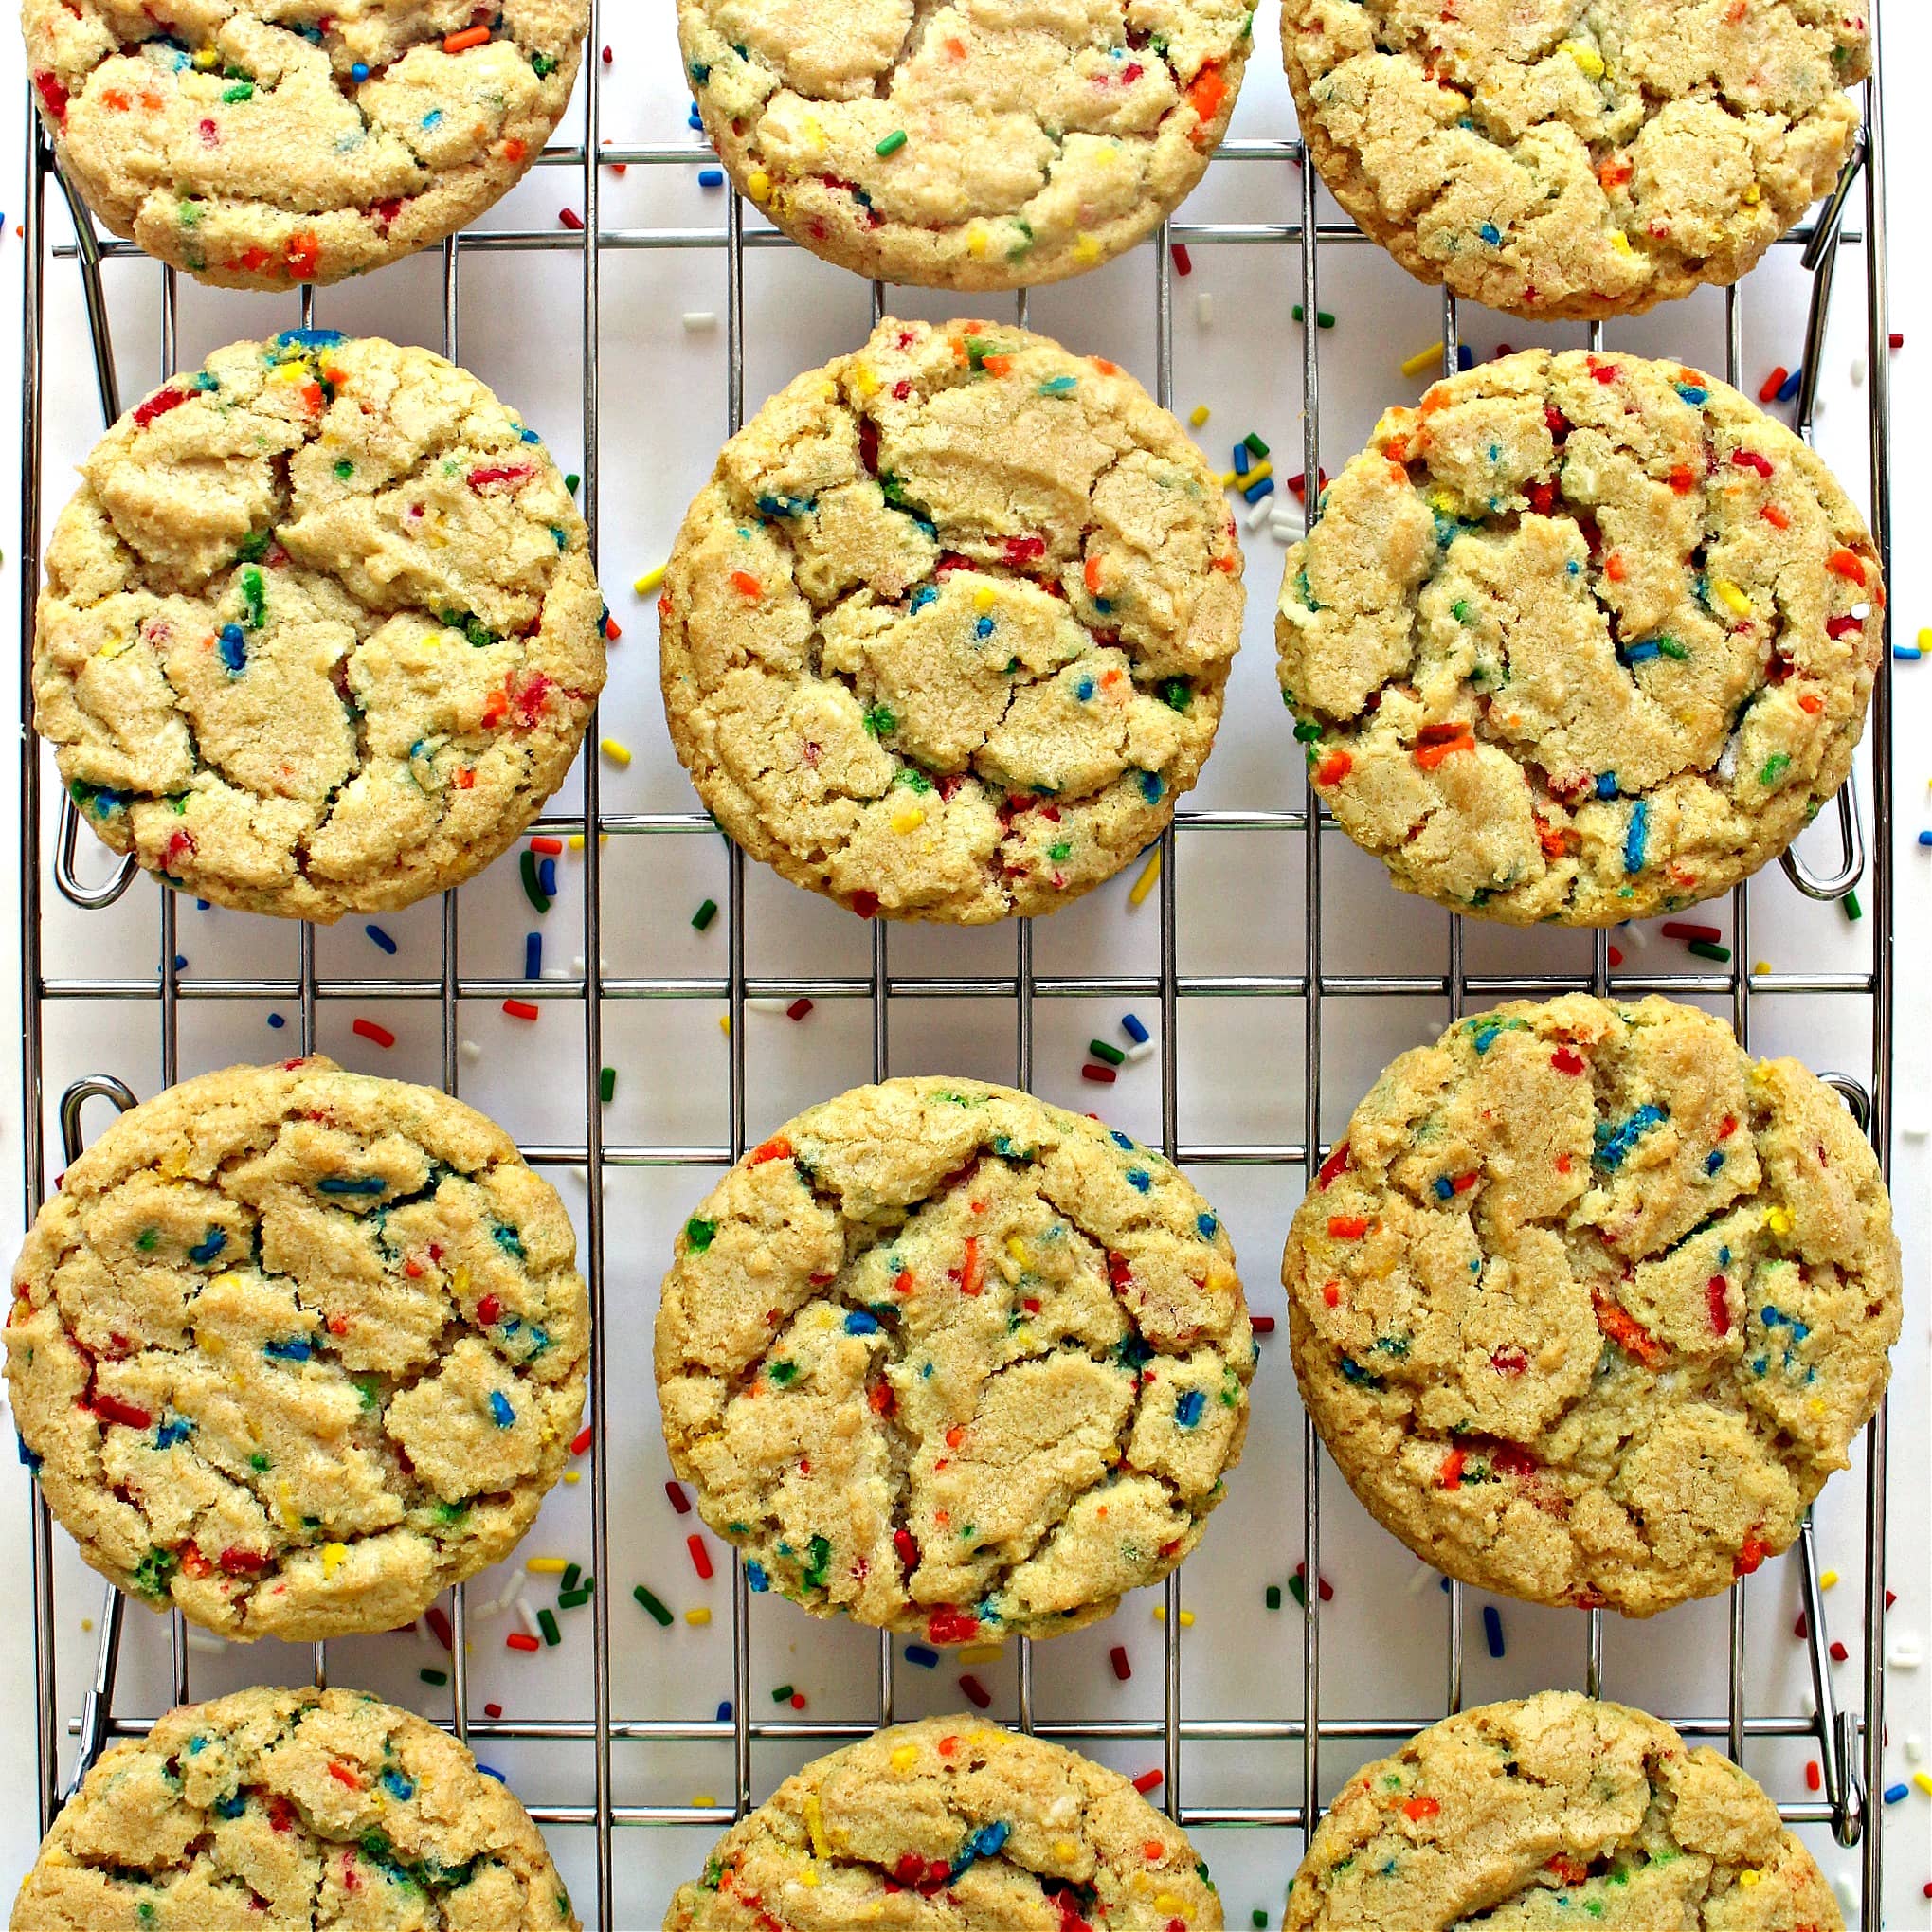 Funfetti Cookies with sprinkles in the dough on a wire cooling rack.